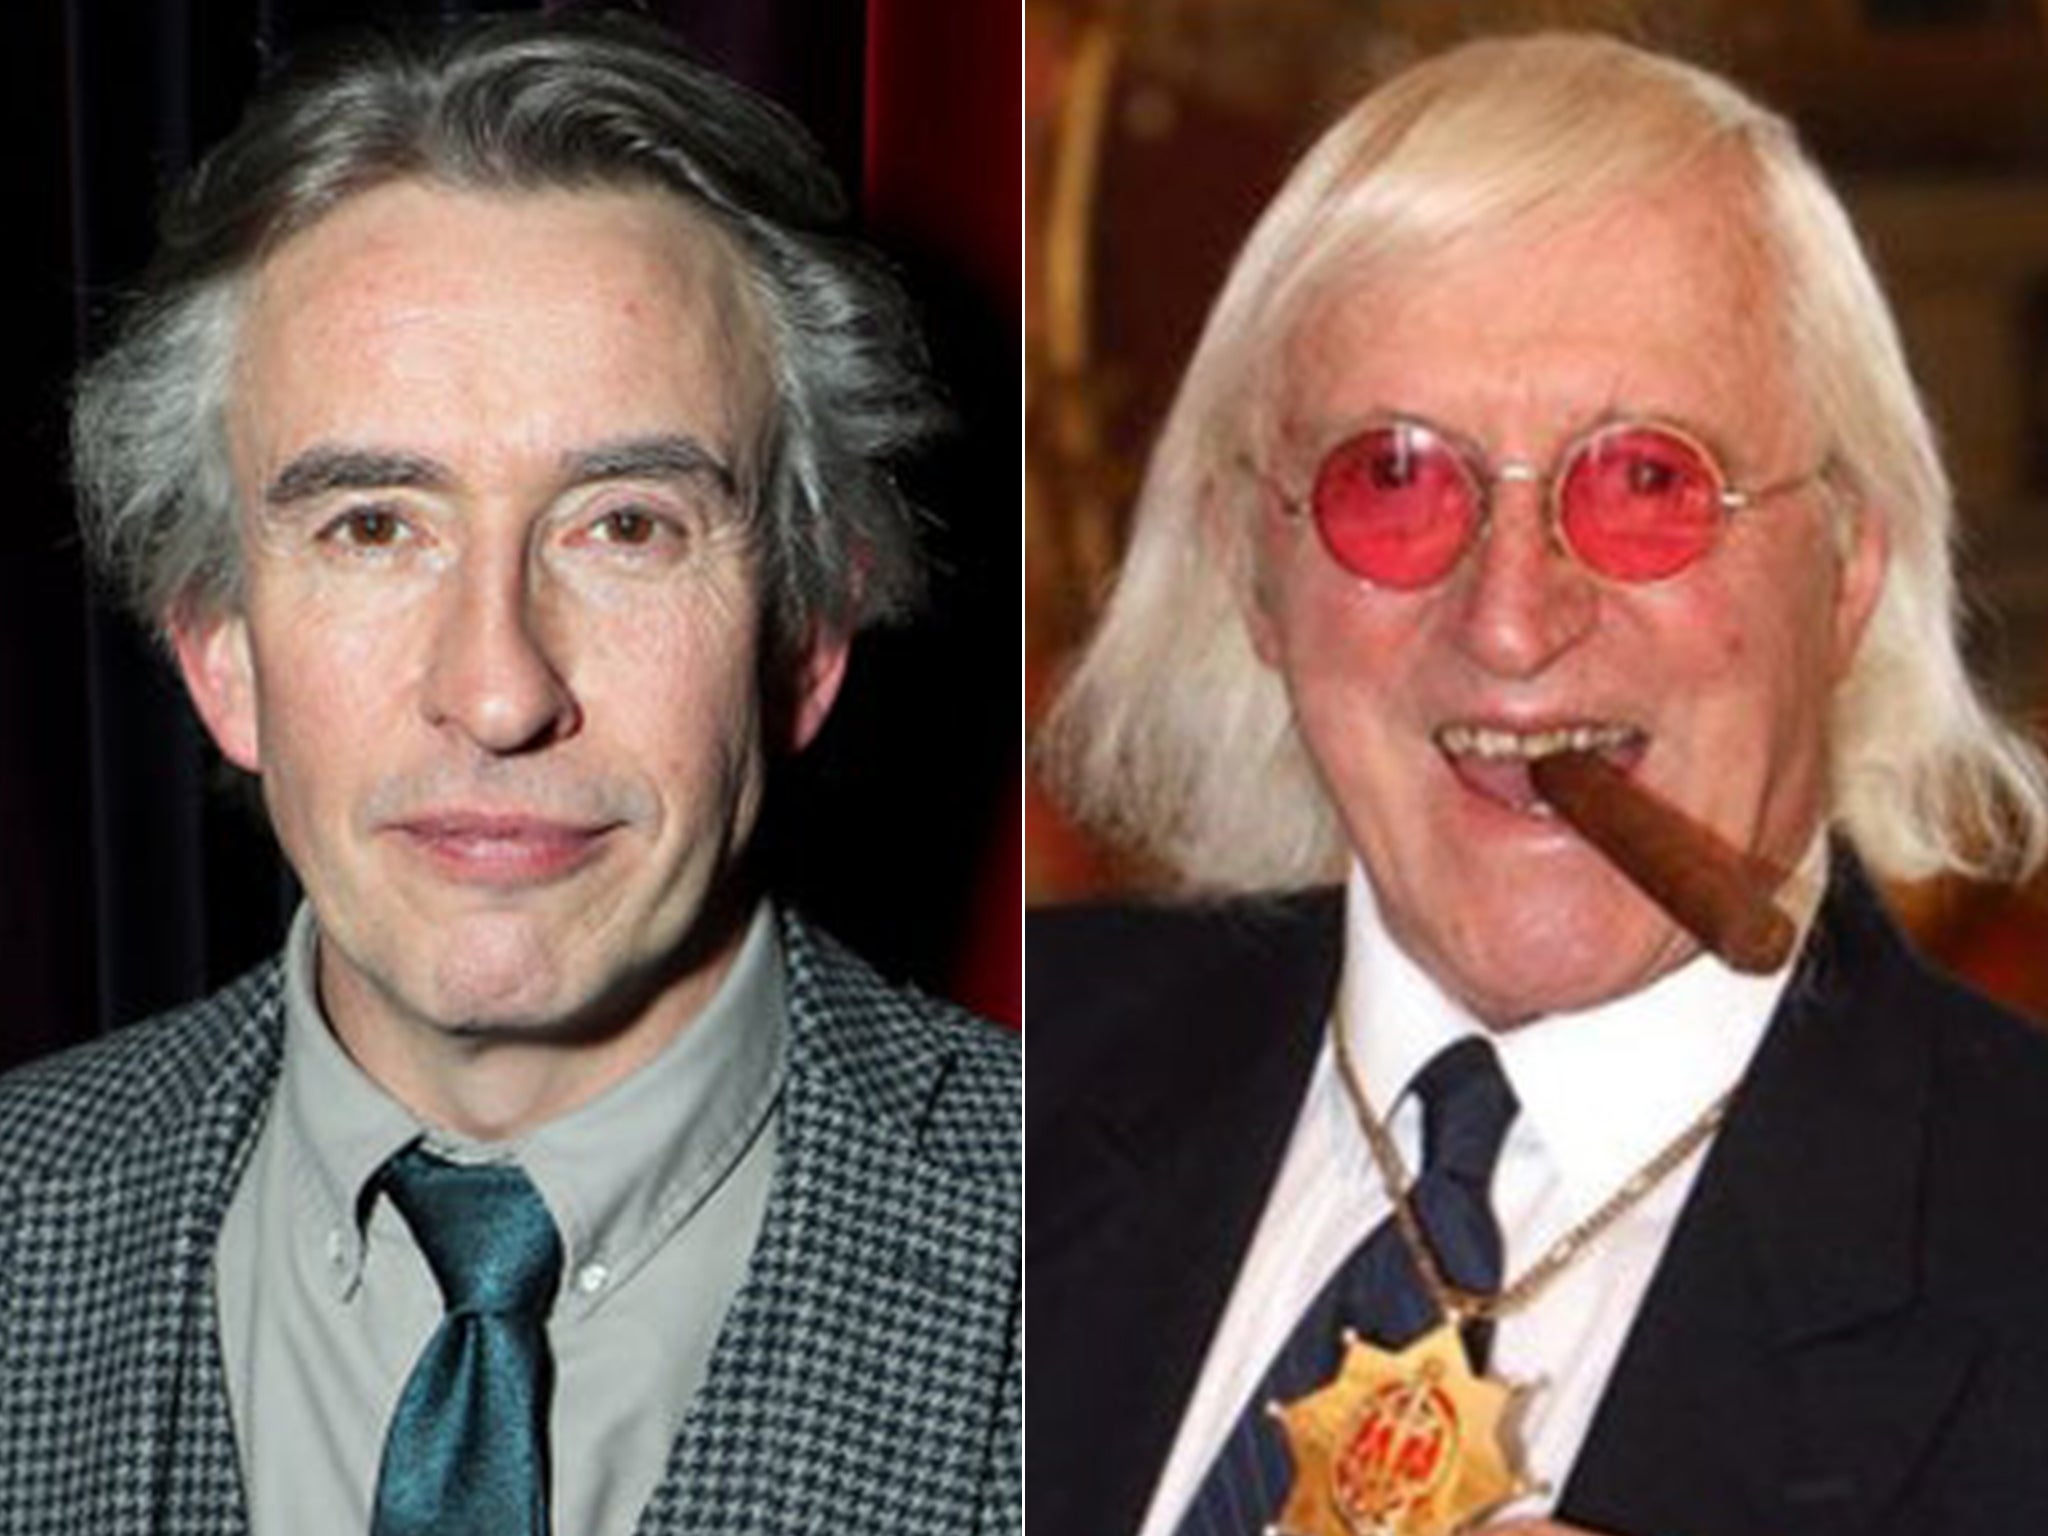 BBC drama ‘The Reckoning’, starring Steve Coogan as Savile, is to air later this year